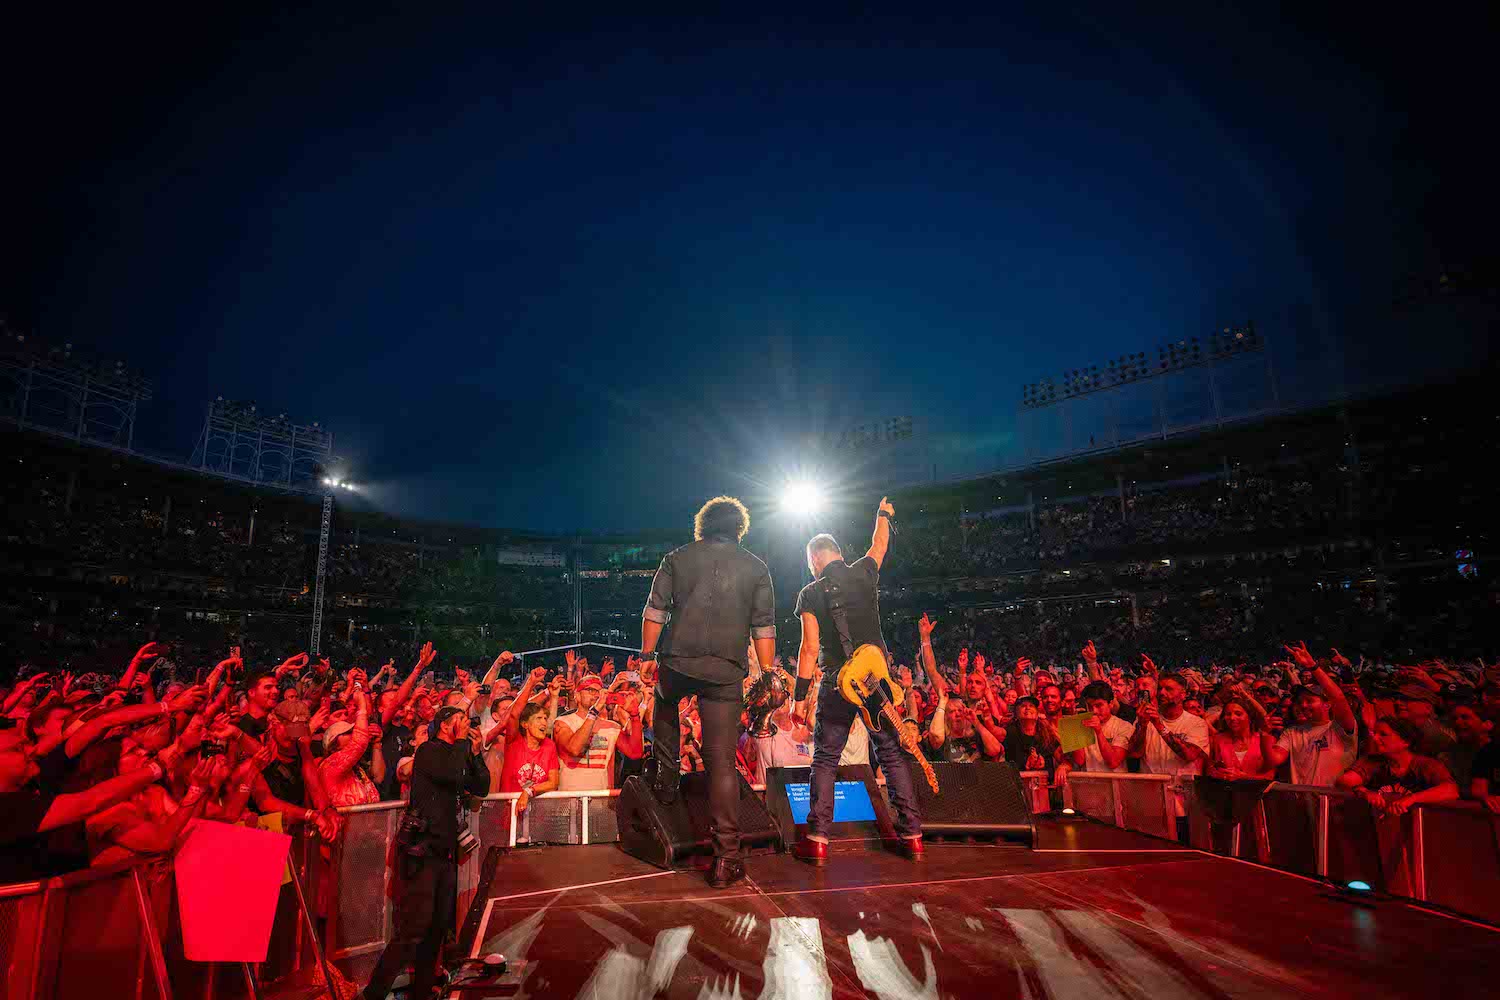 Bruce Springsteen & E Street Band at Wrigley Field, Chicago, Illinois on August 9, 2023.